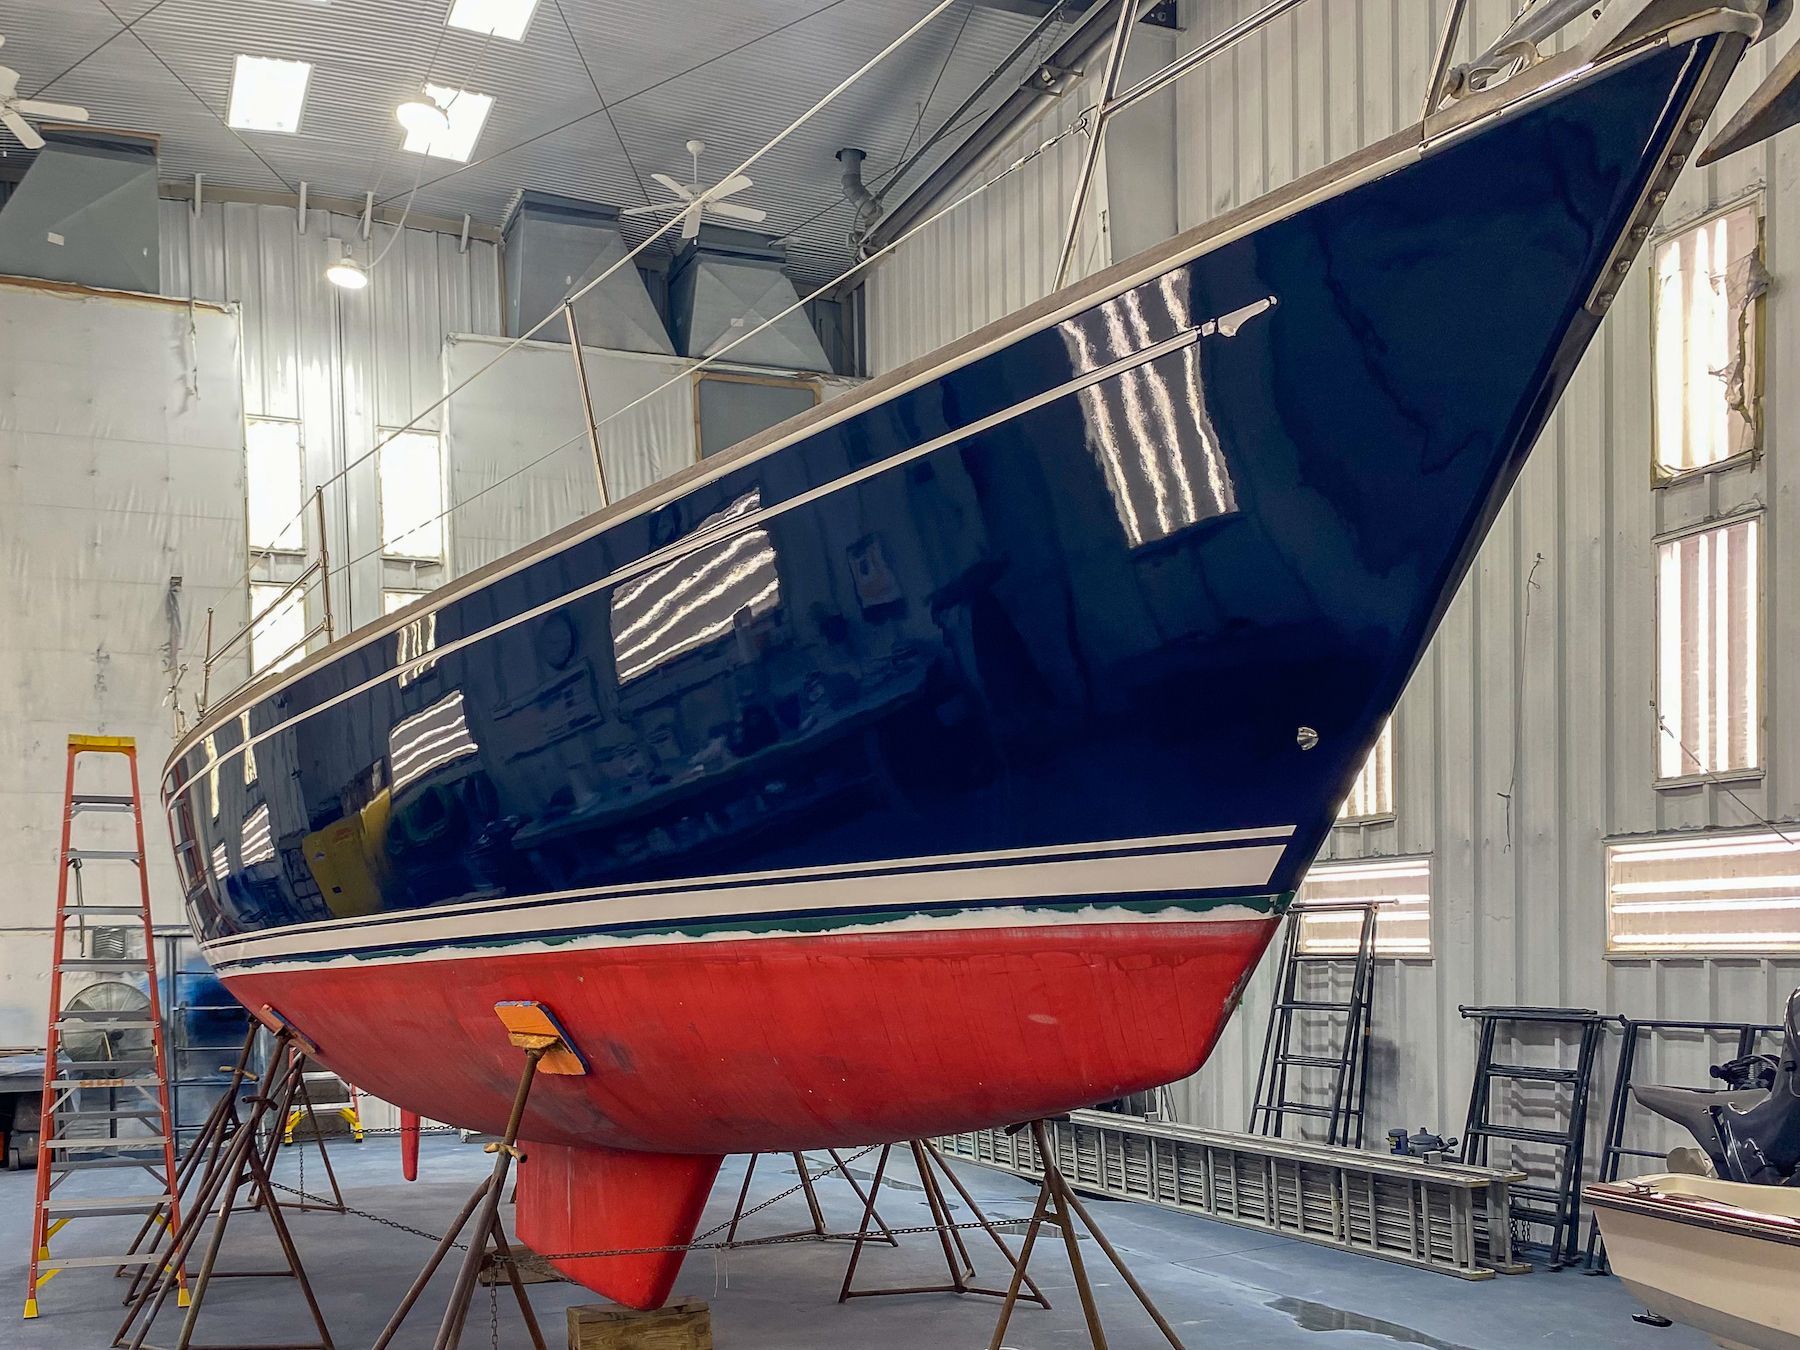 Boat in paint shop with blue hull